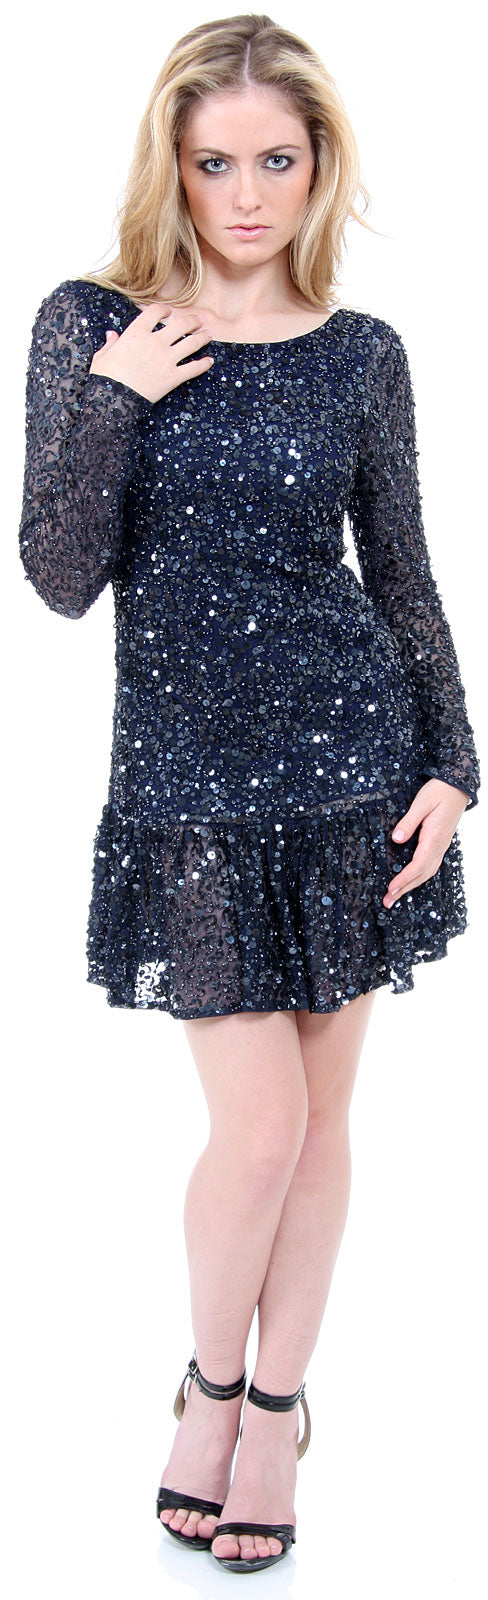 Image of Full Sleeves Flared Skirt Sequined Mini Party Dress in Navy